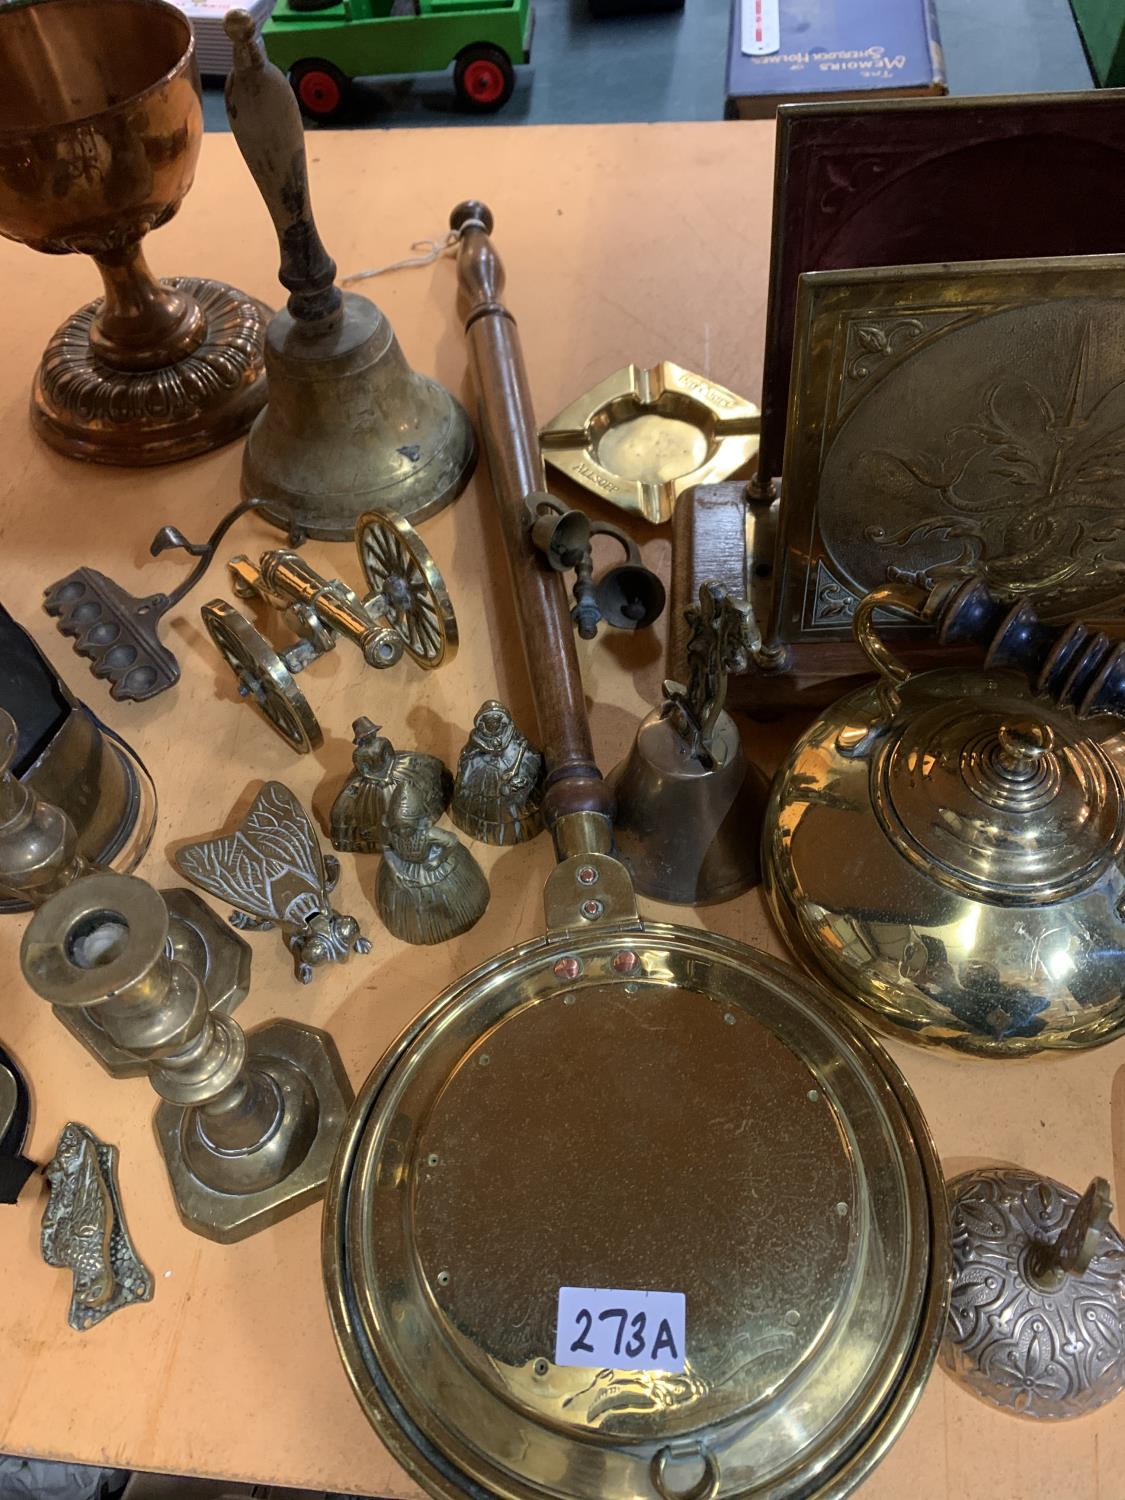 A LARGE QUANTITY OF BRASSWARE TO INCLUDE A BELL, HORSE BRASSES, KETTLE, CANDLESTICKS, CANNON, LAMP - Image 9 of 12